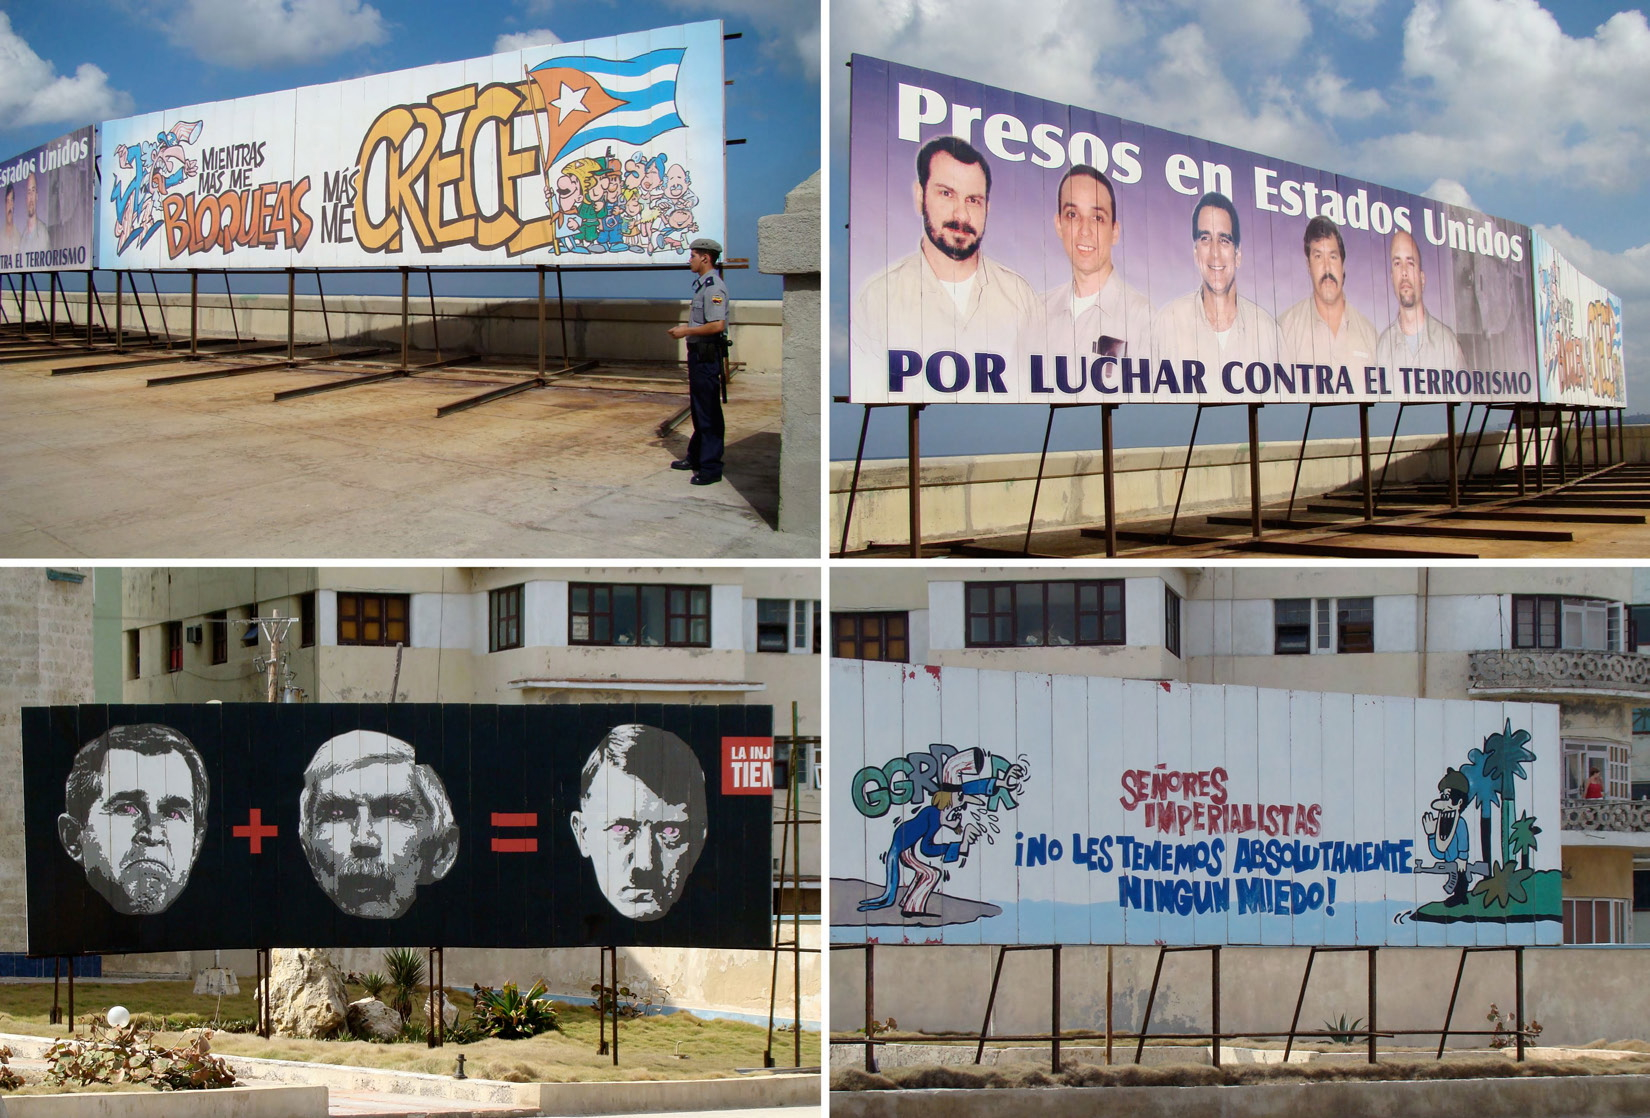 Images showing four political billboards with anti-U.S. sentiments